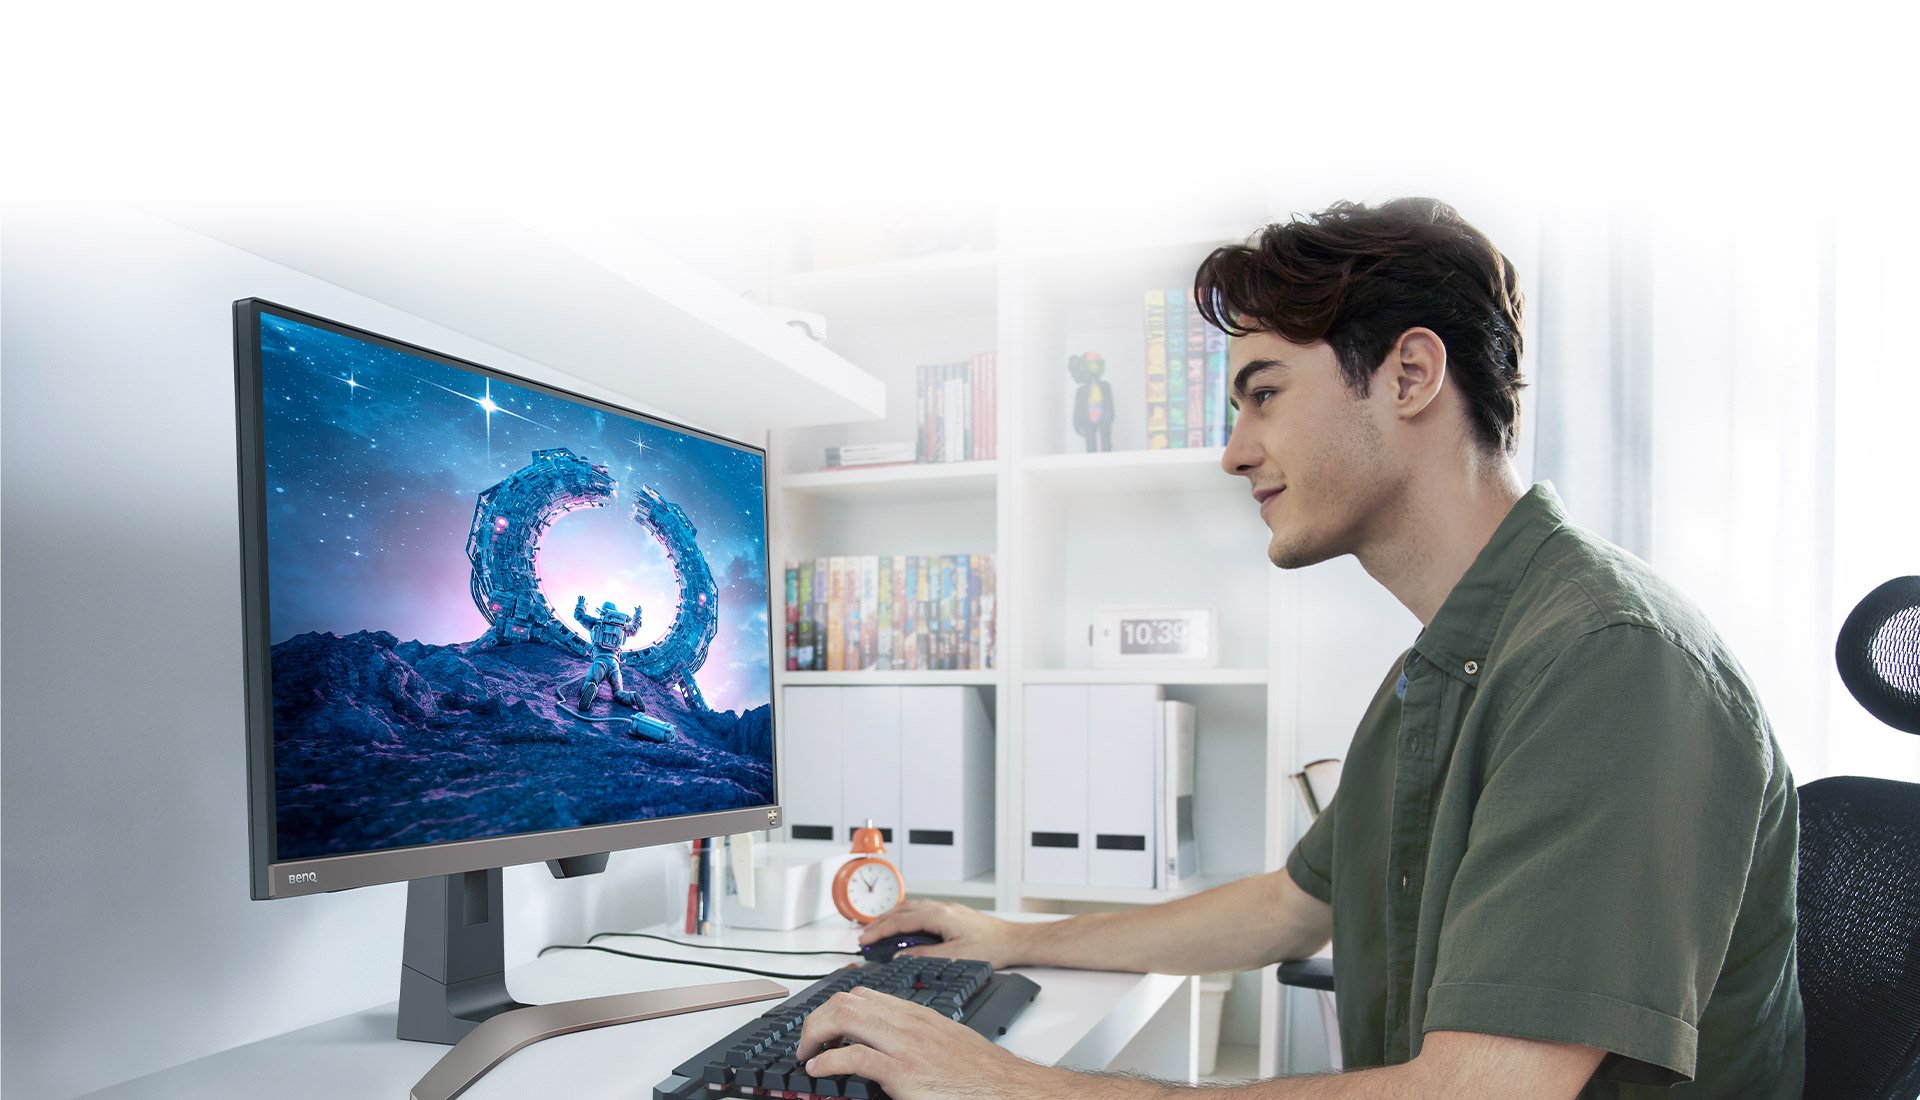 benq’s industry-leading eye-care tech reduces eye strain headaches and fatigue while improving viewer comfort